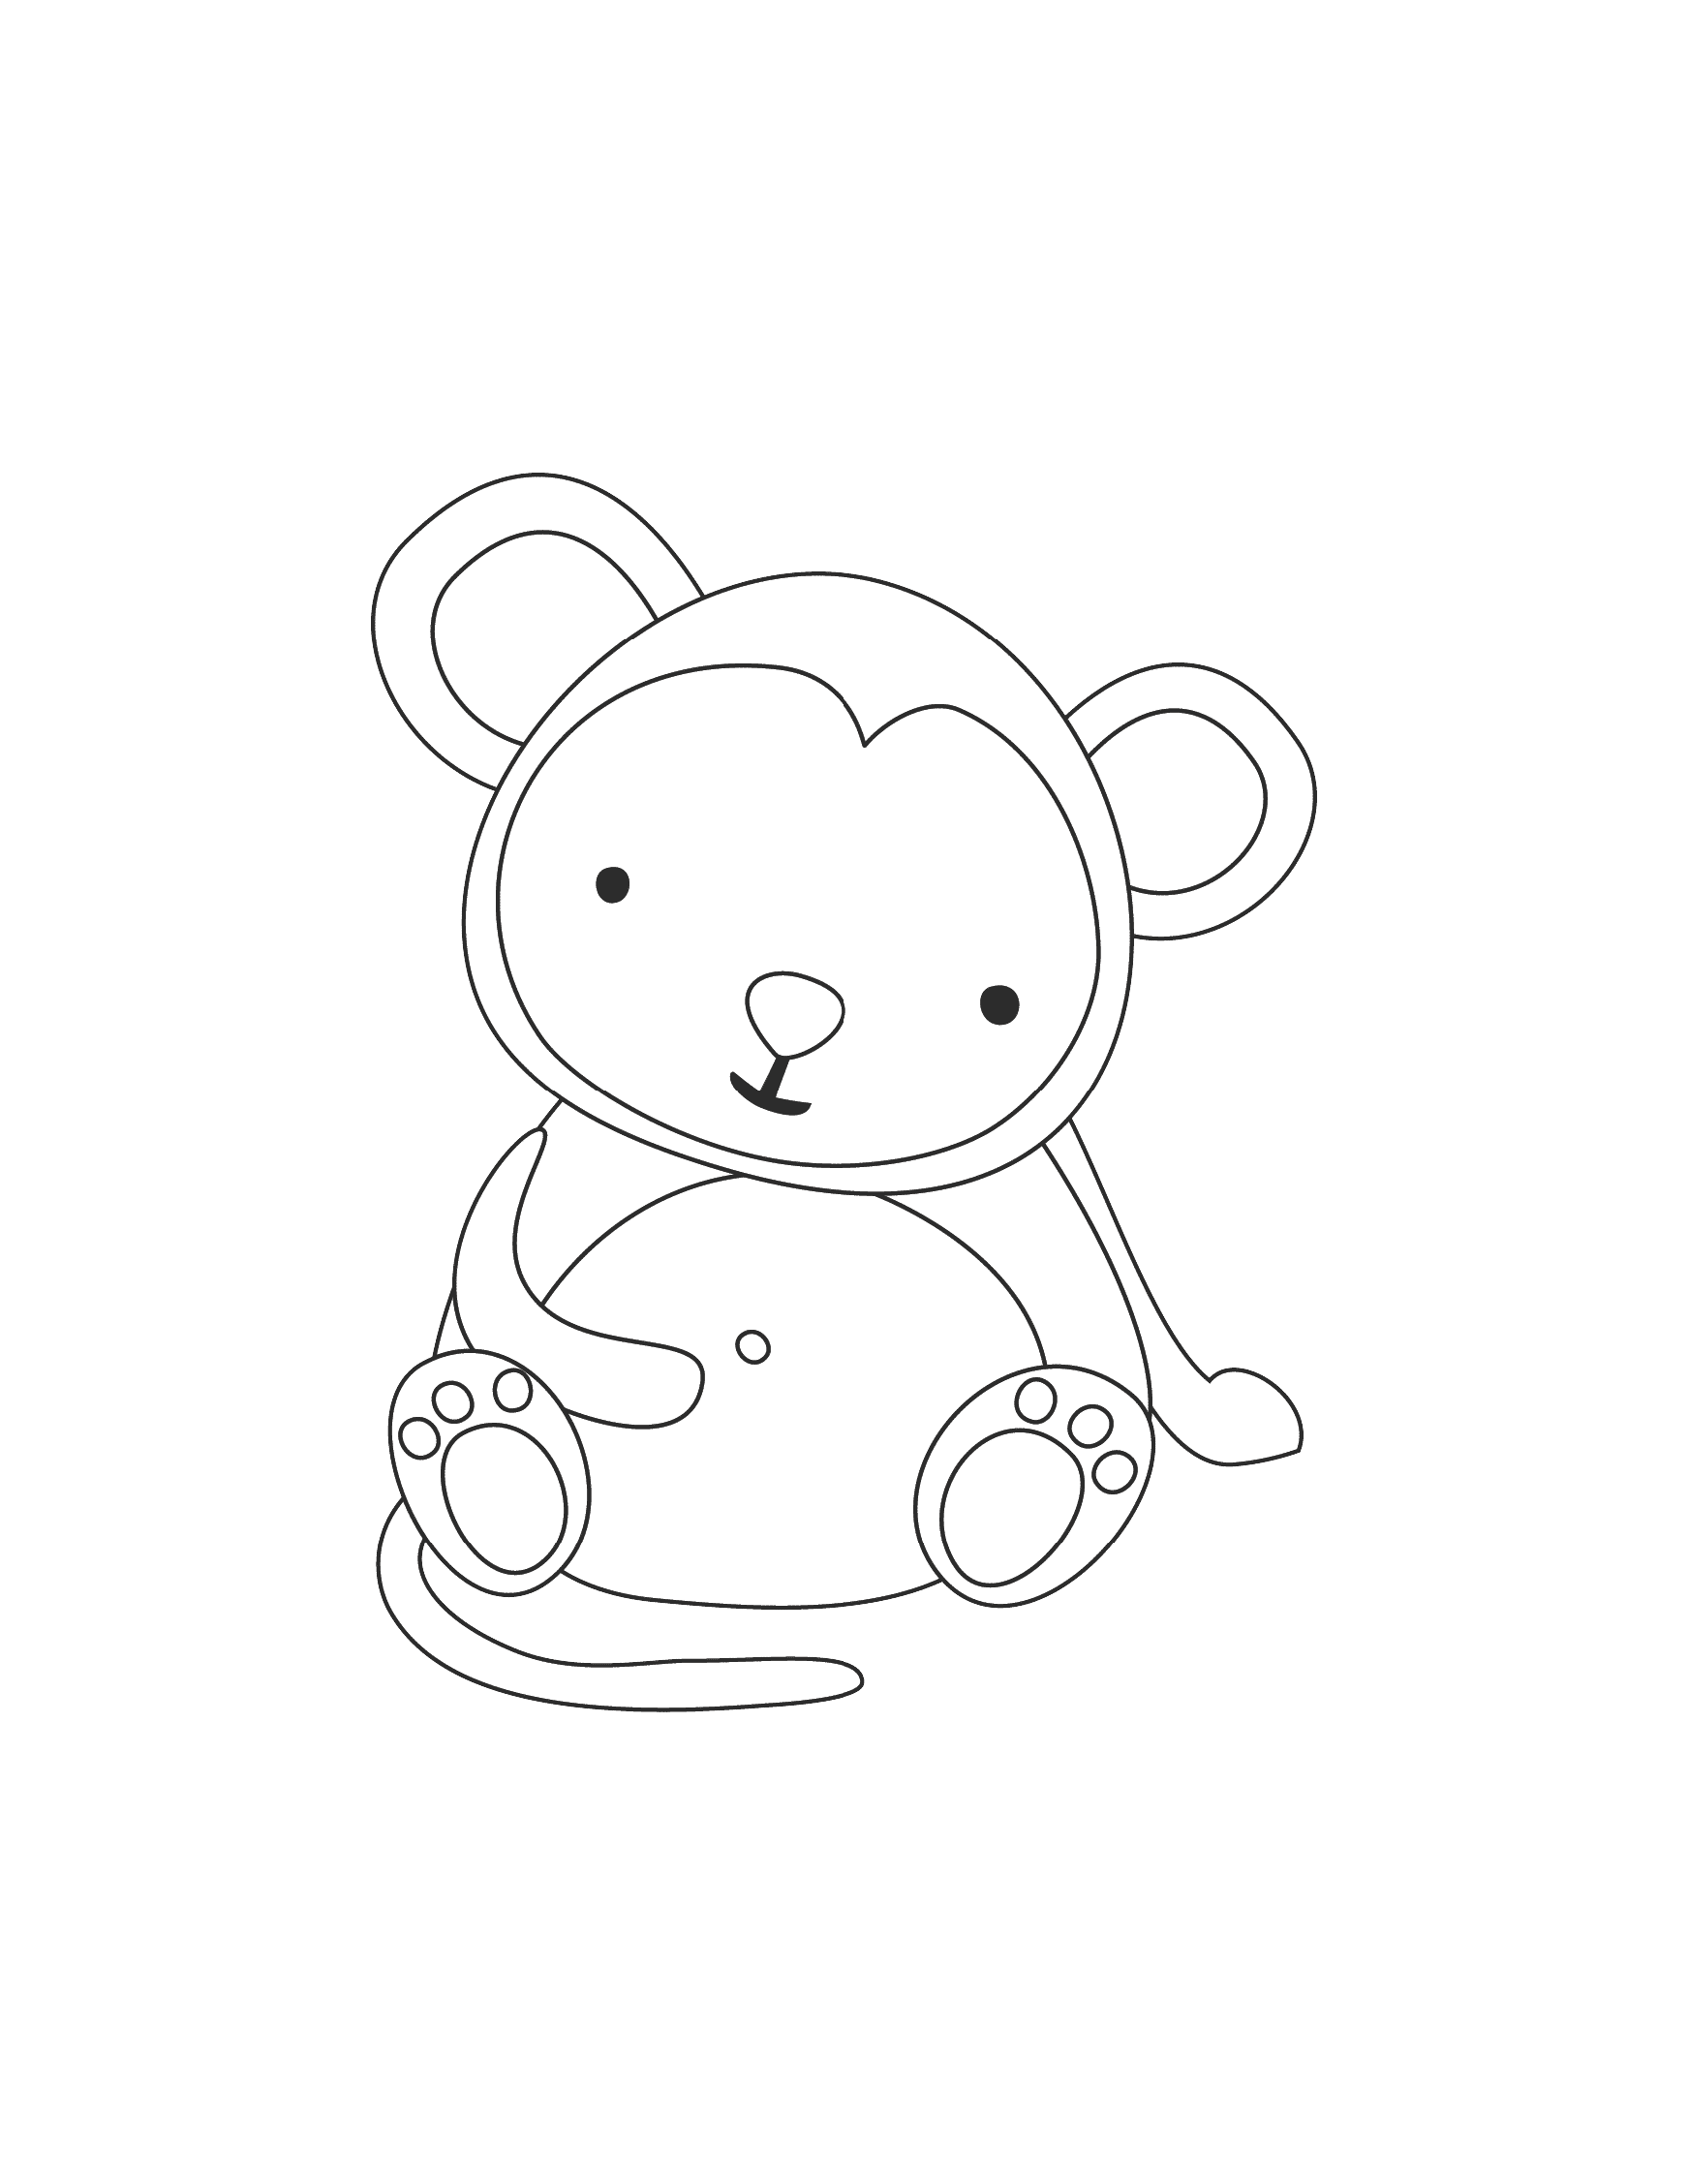 Coloring pages for preschoolers-1 - Live It Smart